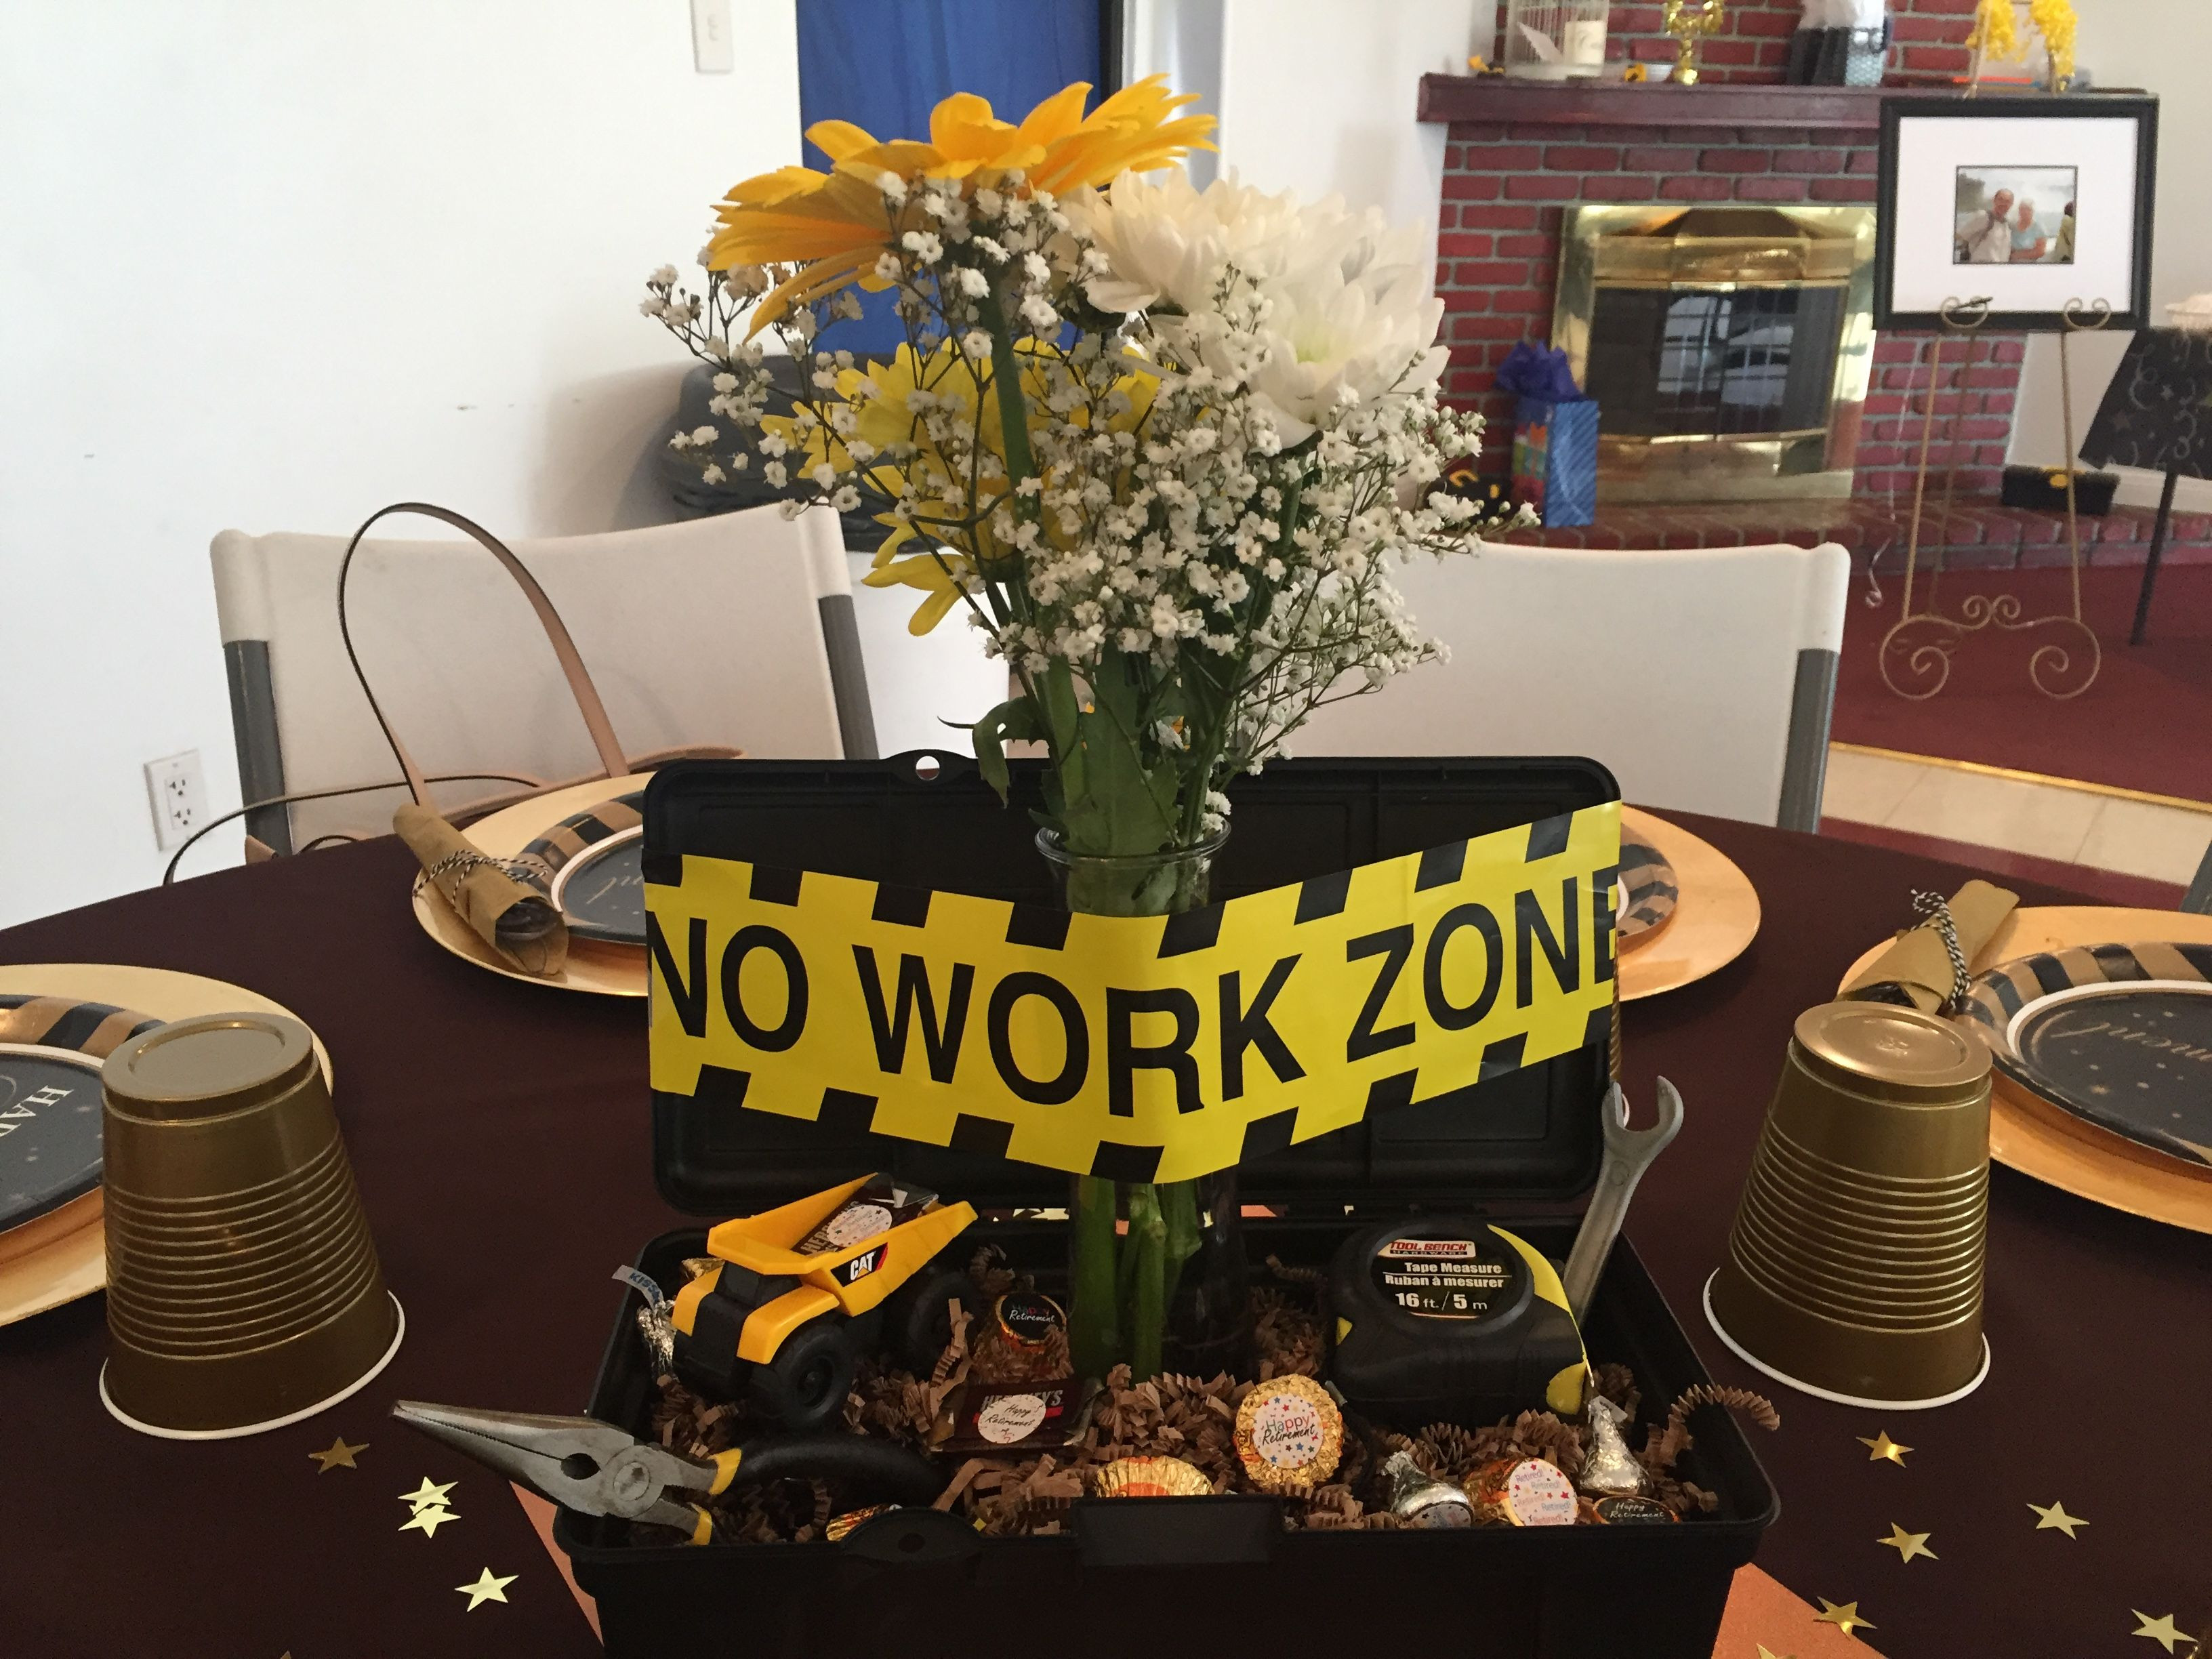 Decoration Ideas For Retirement Party
 I couldn t find a retirement party centerpiece for a